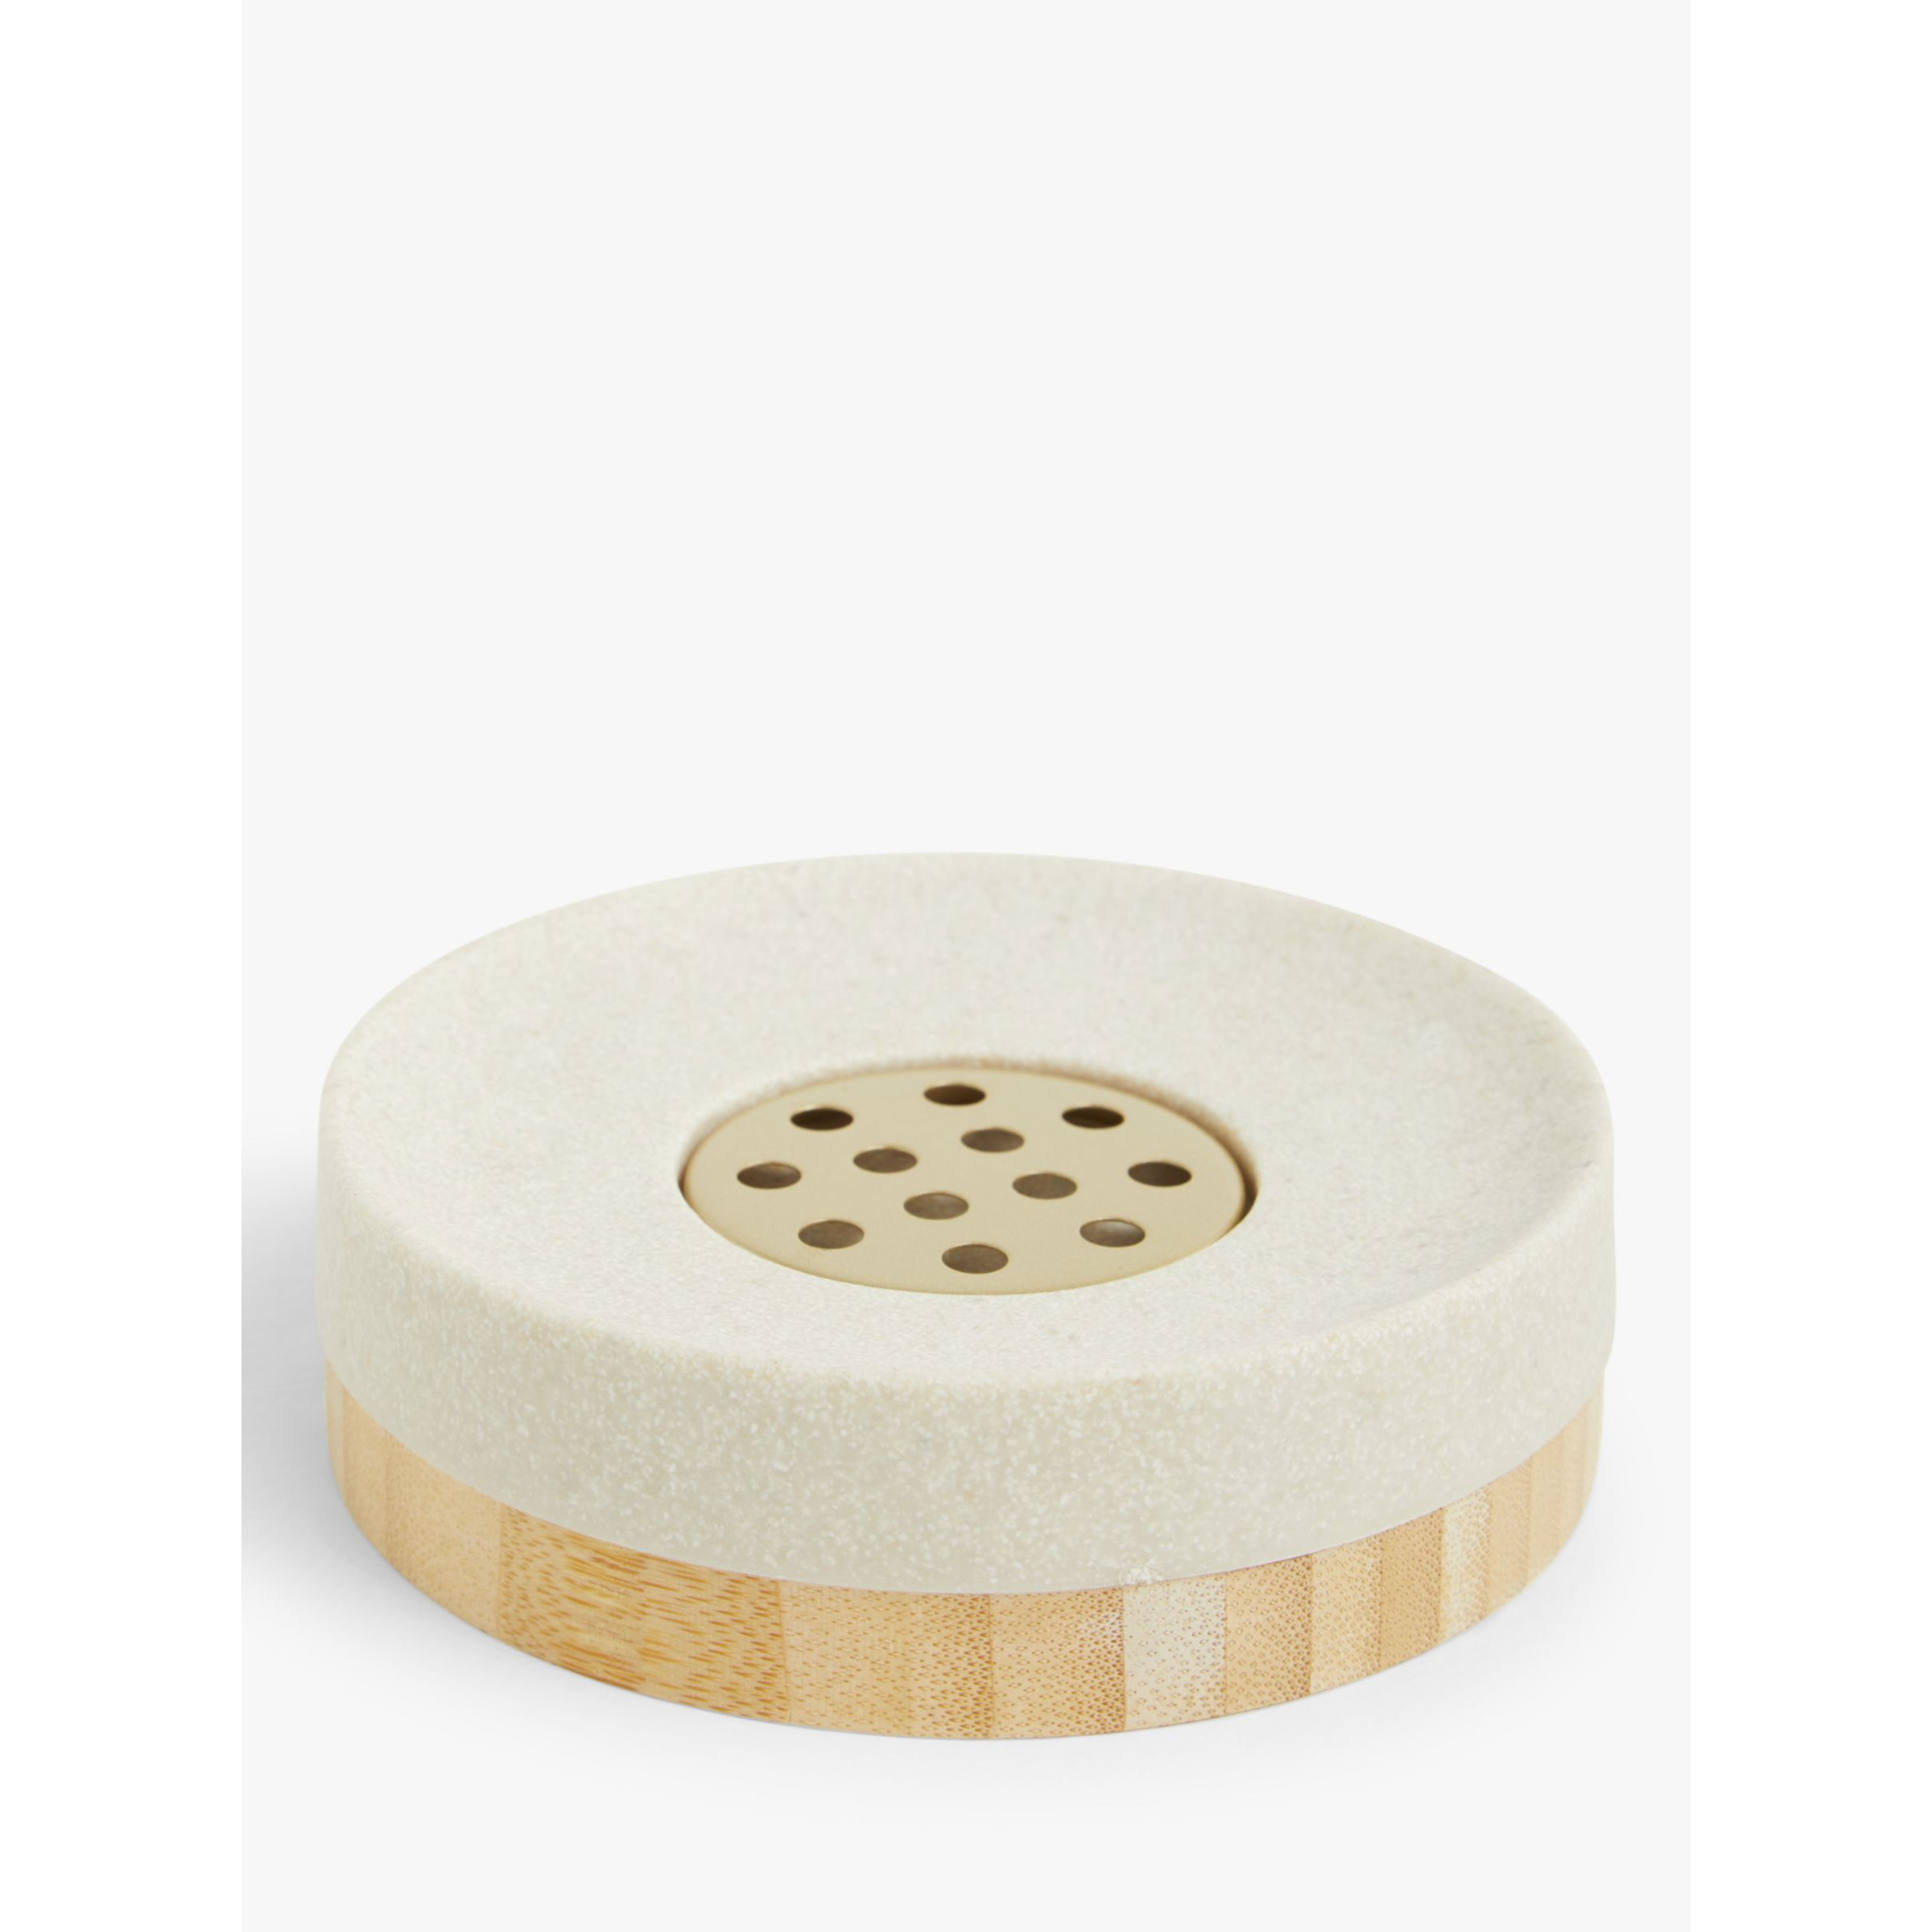 John Lewis Bamboo and Brass Soap Dish - image 1